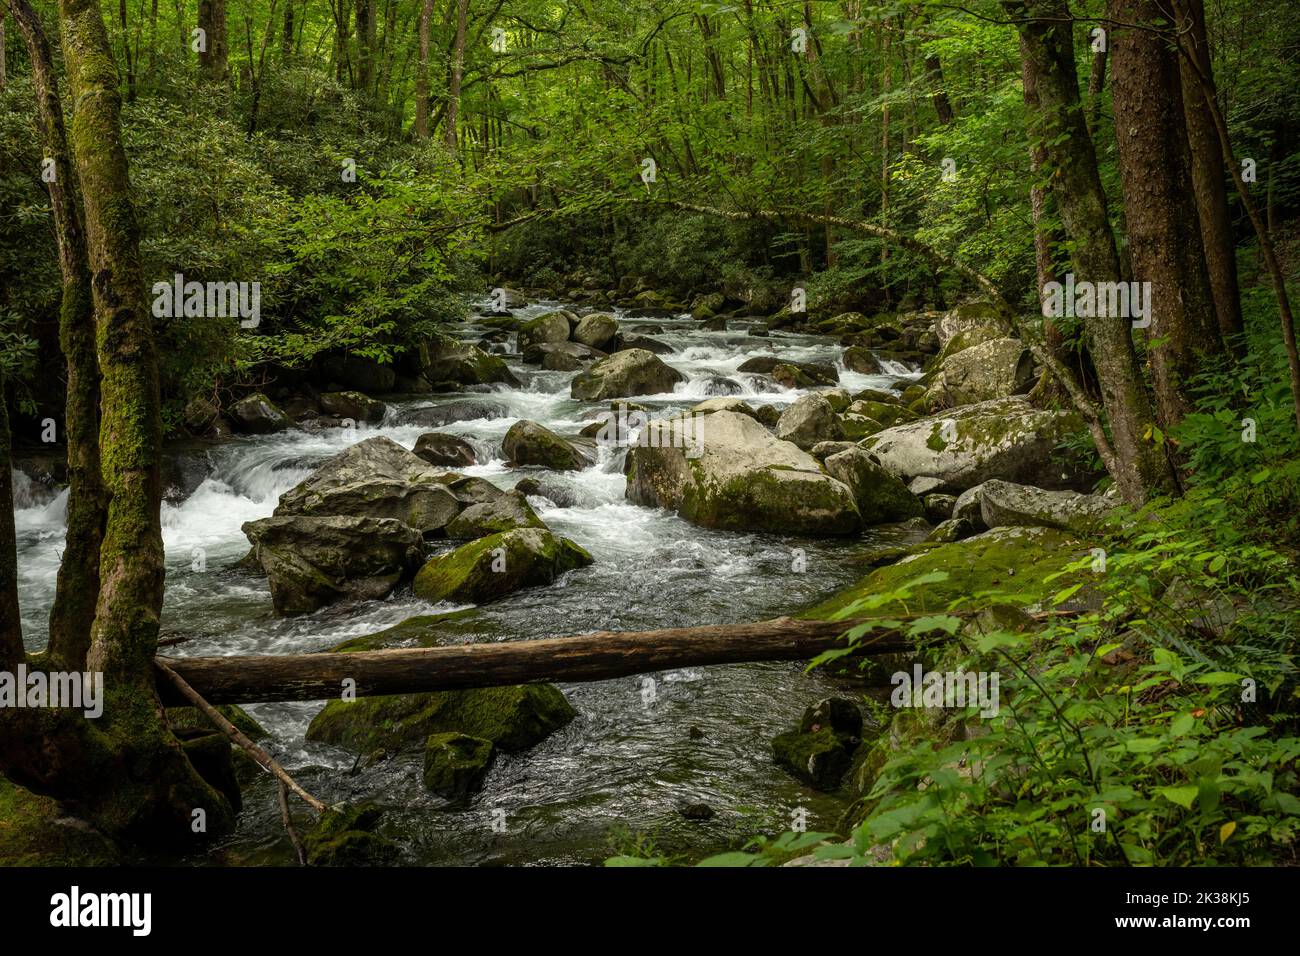 Shades of Green Along Big Creek in Great Smoky Mountains National Park Stock Photo